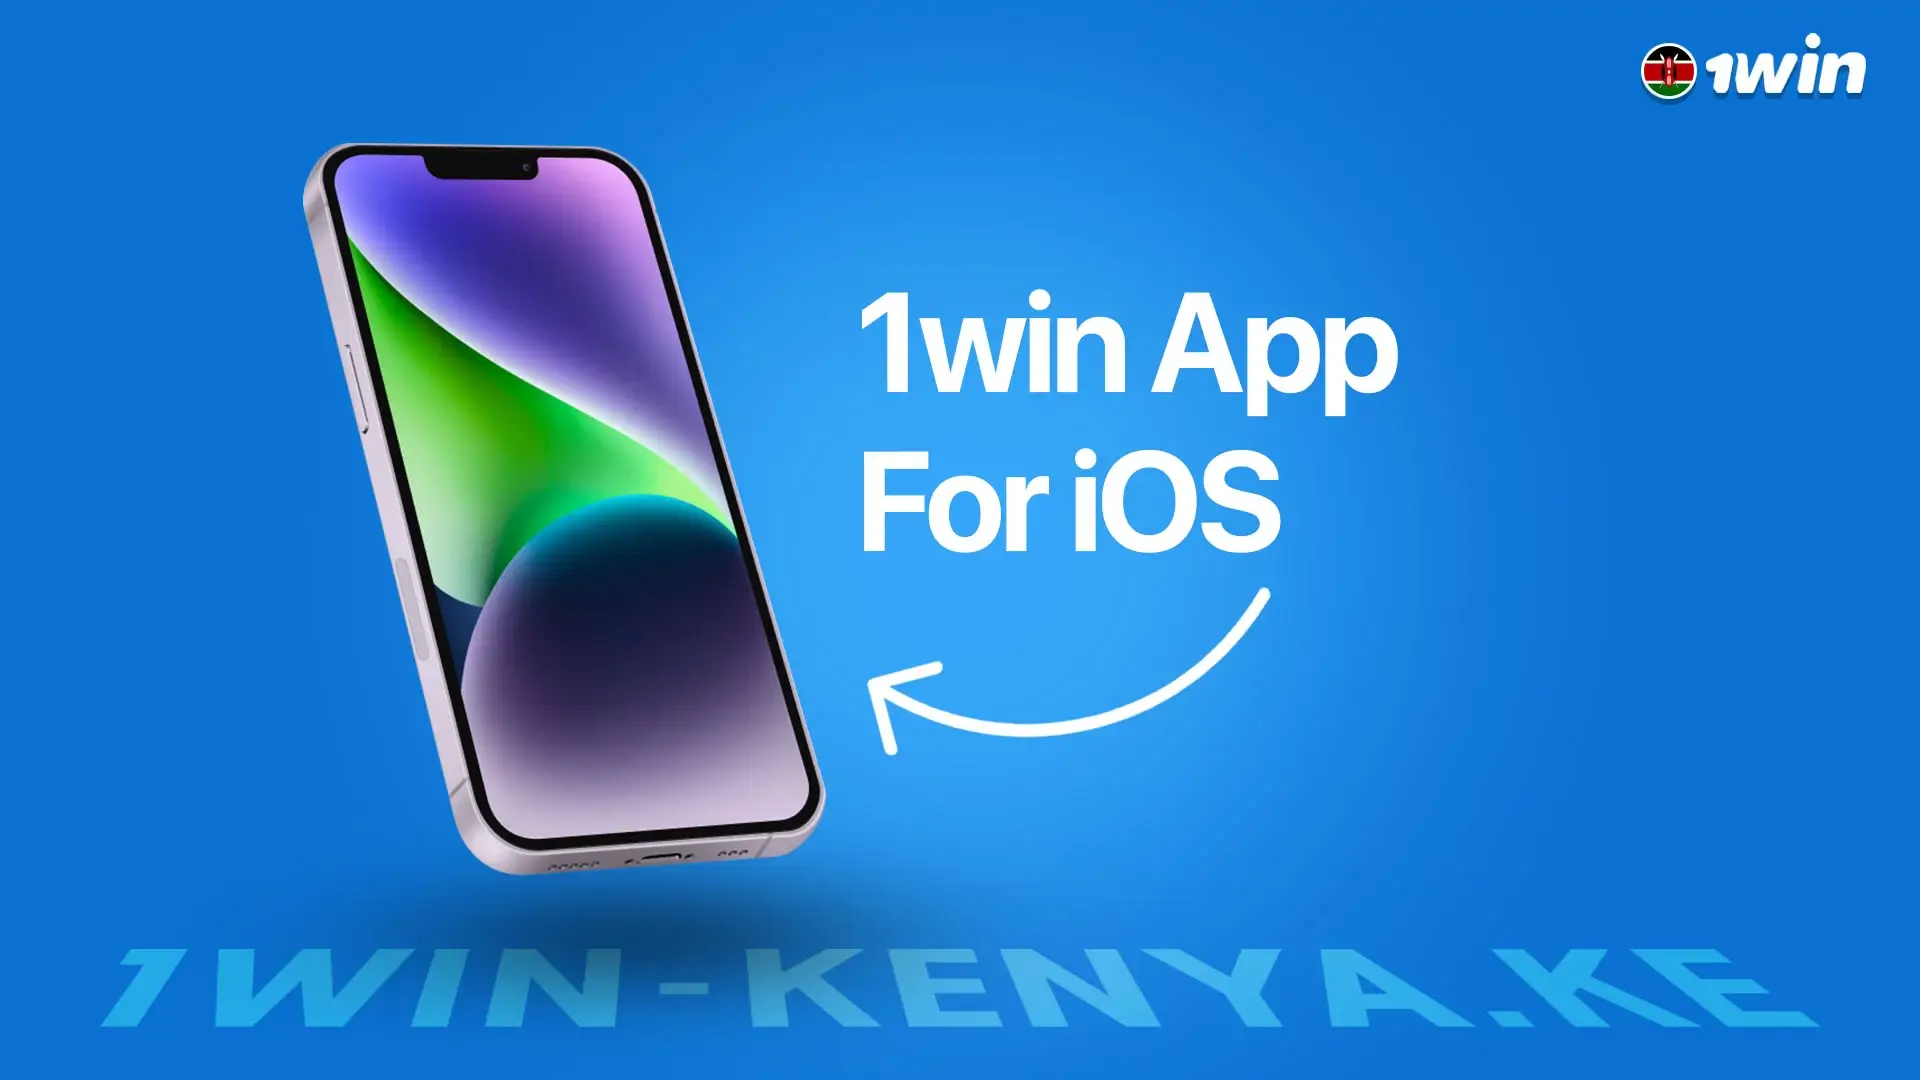 How to download 1win Kenya App for iOS?